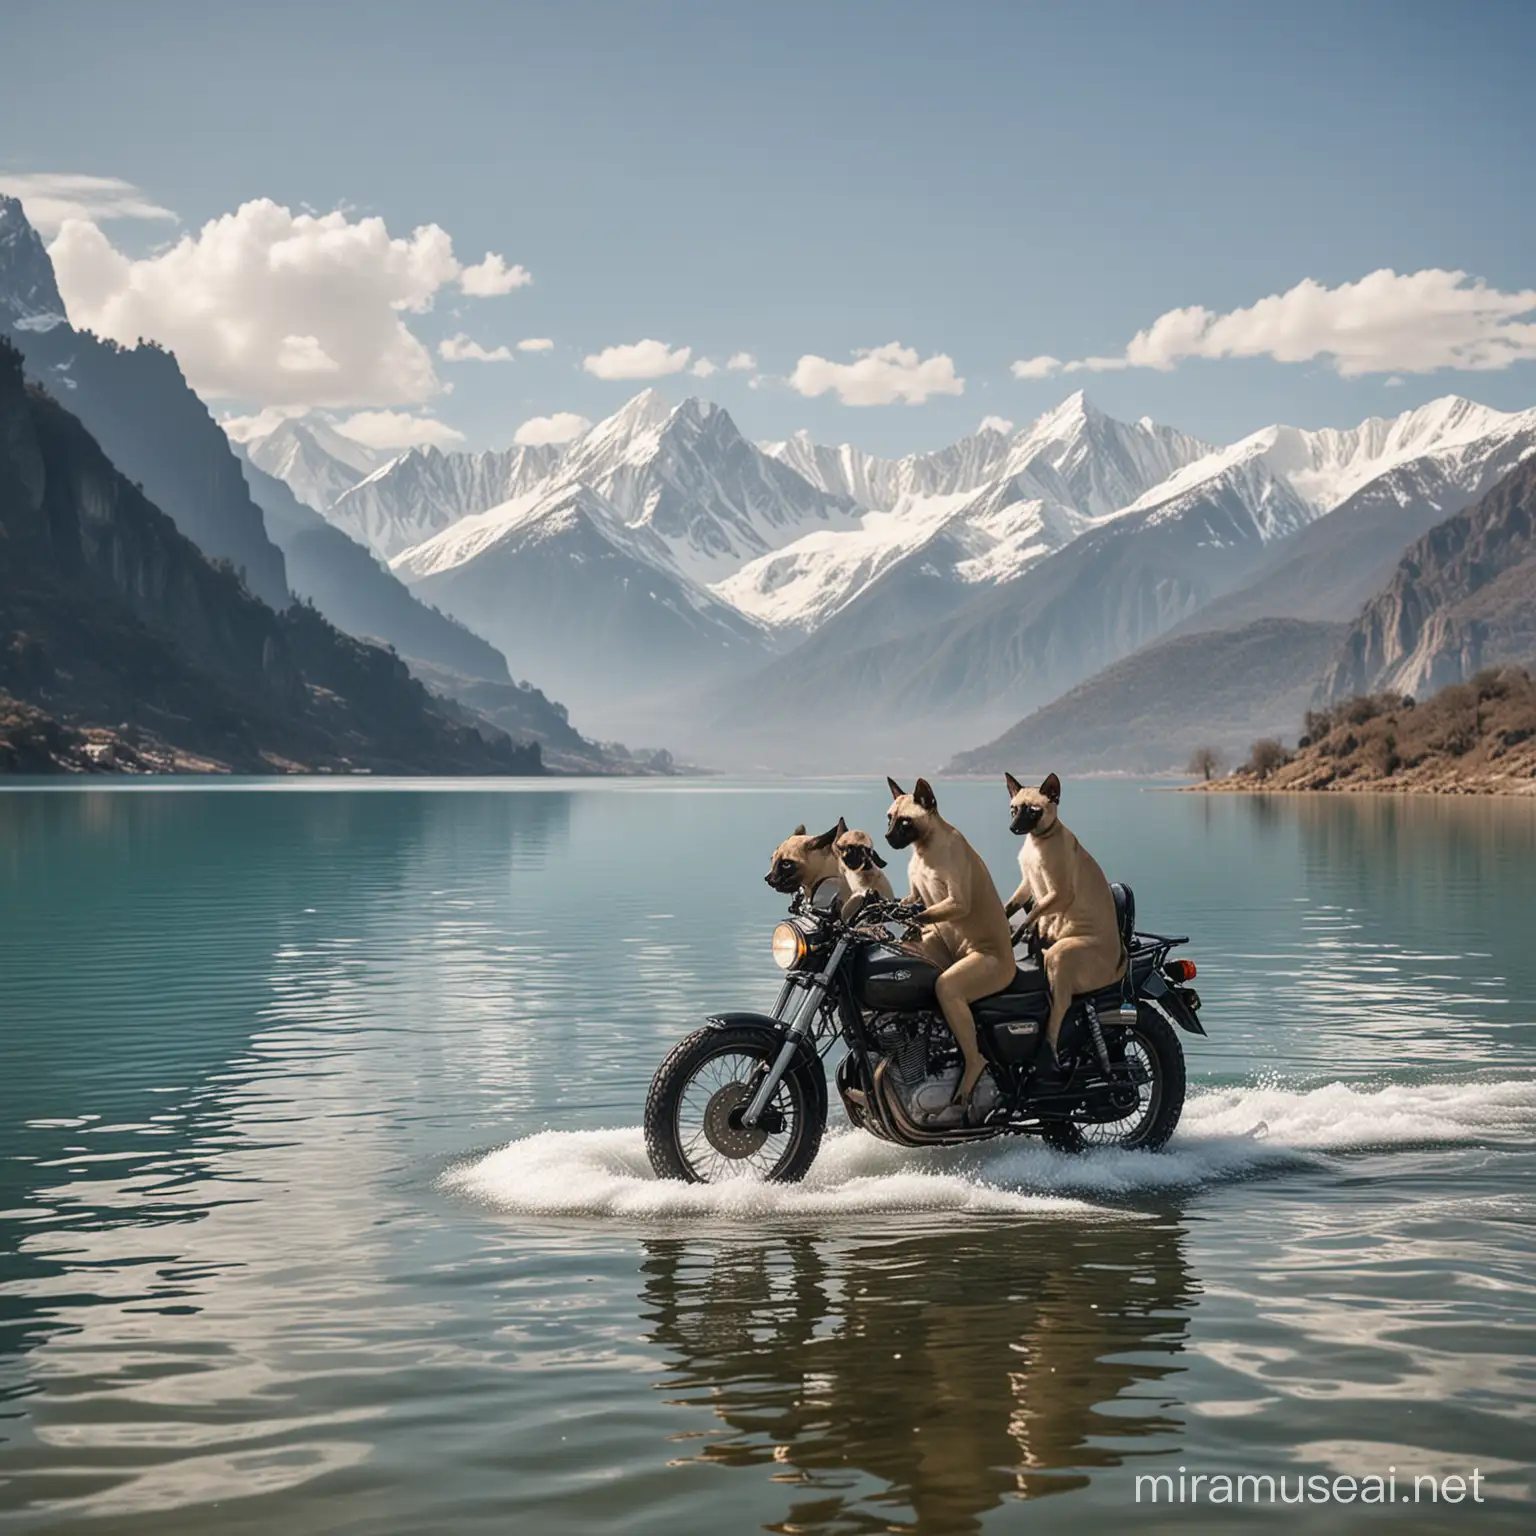 Siamese Quadrupeds Riding Motorcycle on Water with Snowy Mountain Background